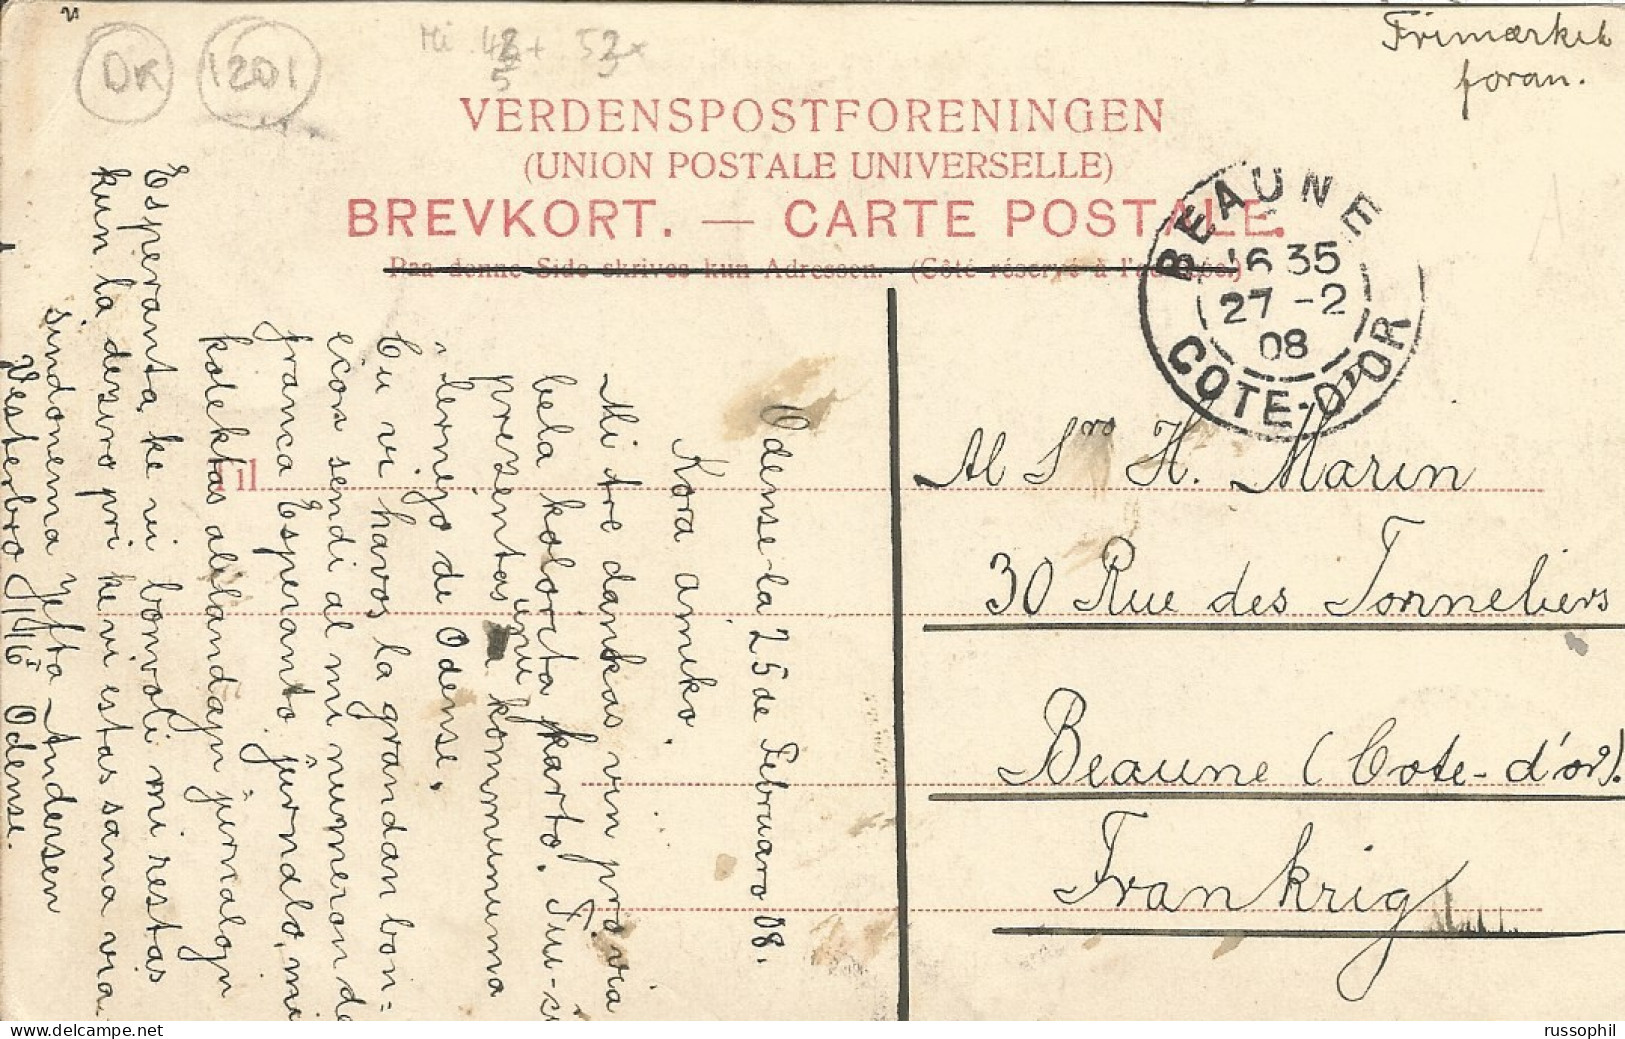 DENMARK - SPECTACULAR 6 STAMP FRANKING (10 ORE) ON PC (VIEW OF ODENSEE) TO FRANCE - 1908 - Covers & Documents